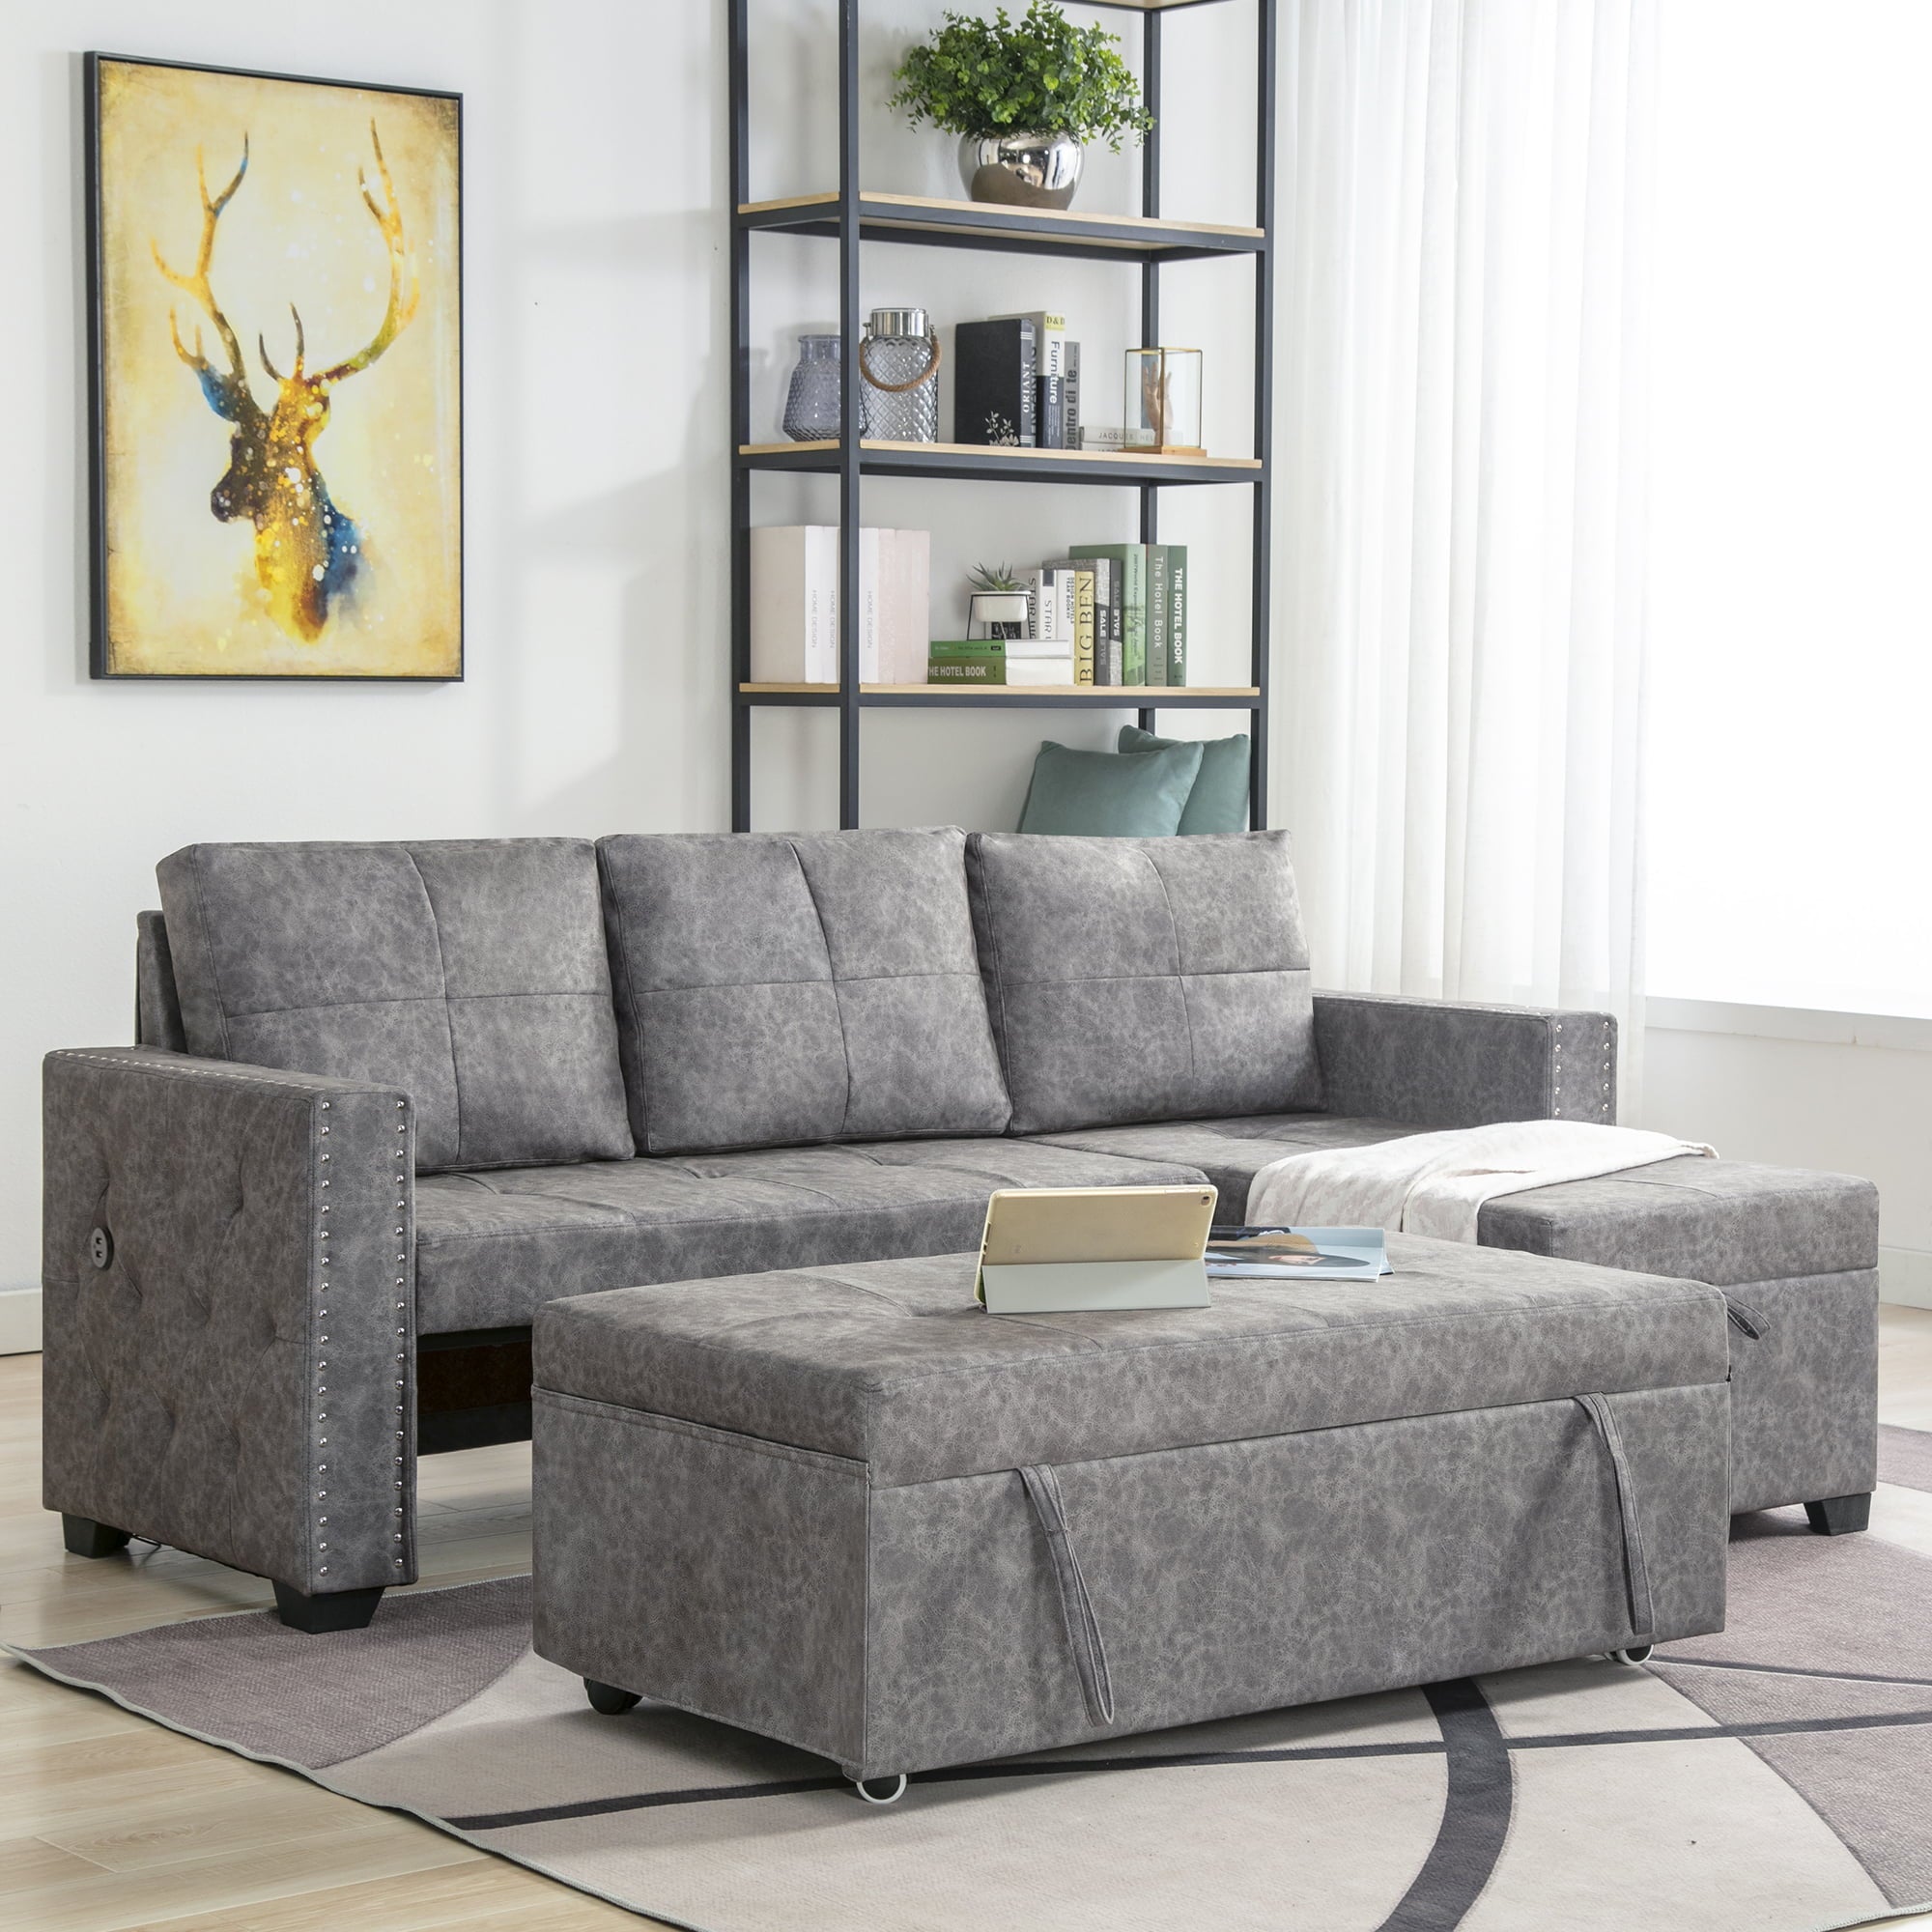 SUGIFT 84in L Sectional Sofa with USB Charger, Seats Sofa Bed with Storage Chaise, Sleeper Independent Use as Coffee Table